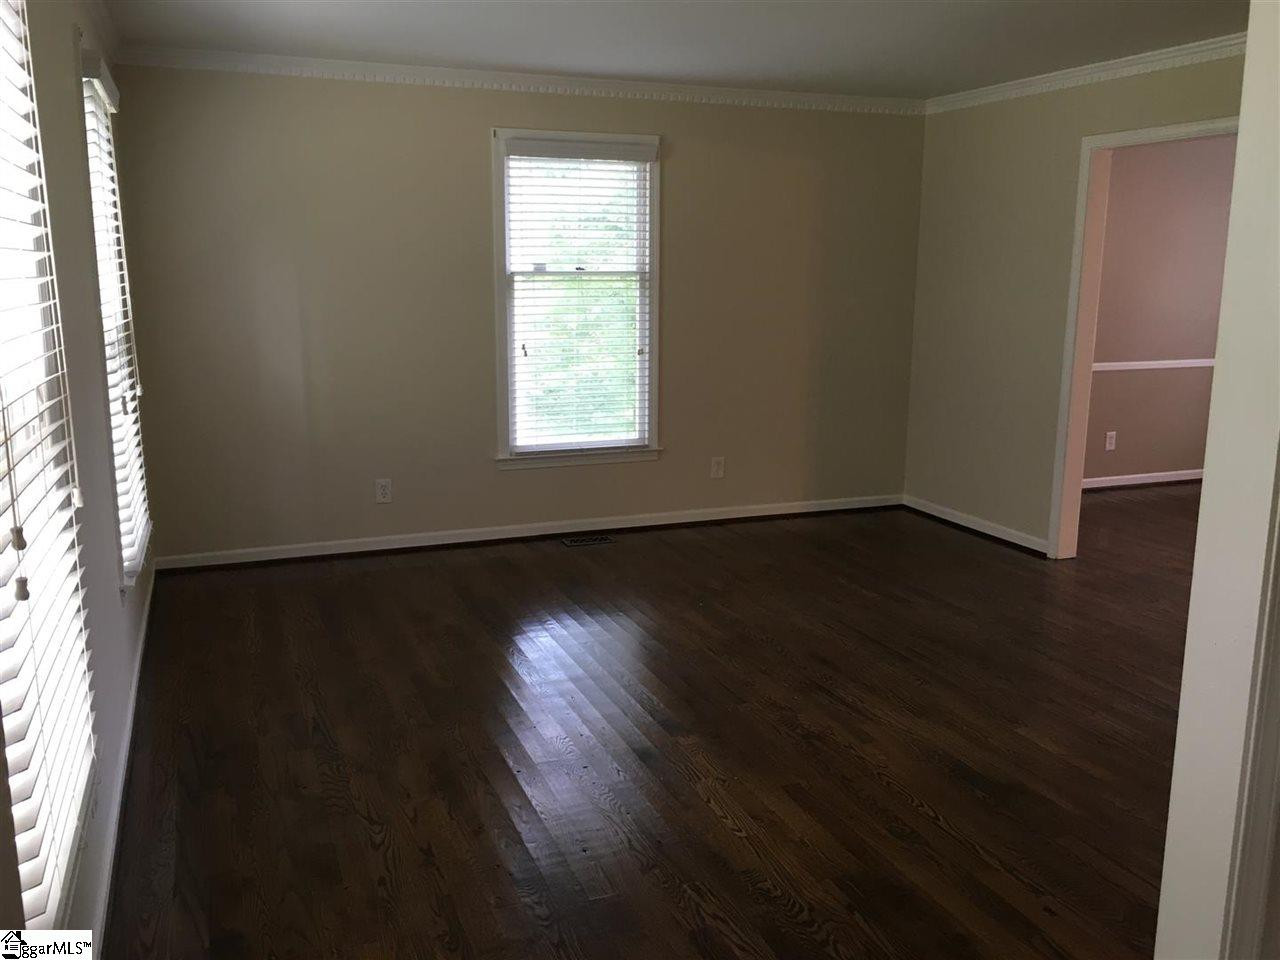 13 Famous Hardwood Flooring fort Mill Sc 2024 free download hardwood flooring fort mill sc of mlsa 1375338 6 el jema forest drive piedmont sc home for sale pertaining to 1375338 residential jnynsi o